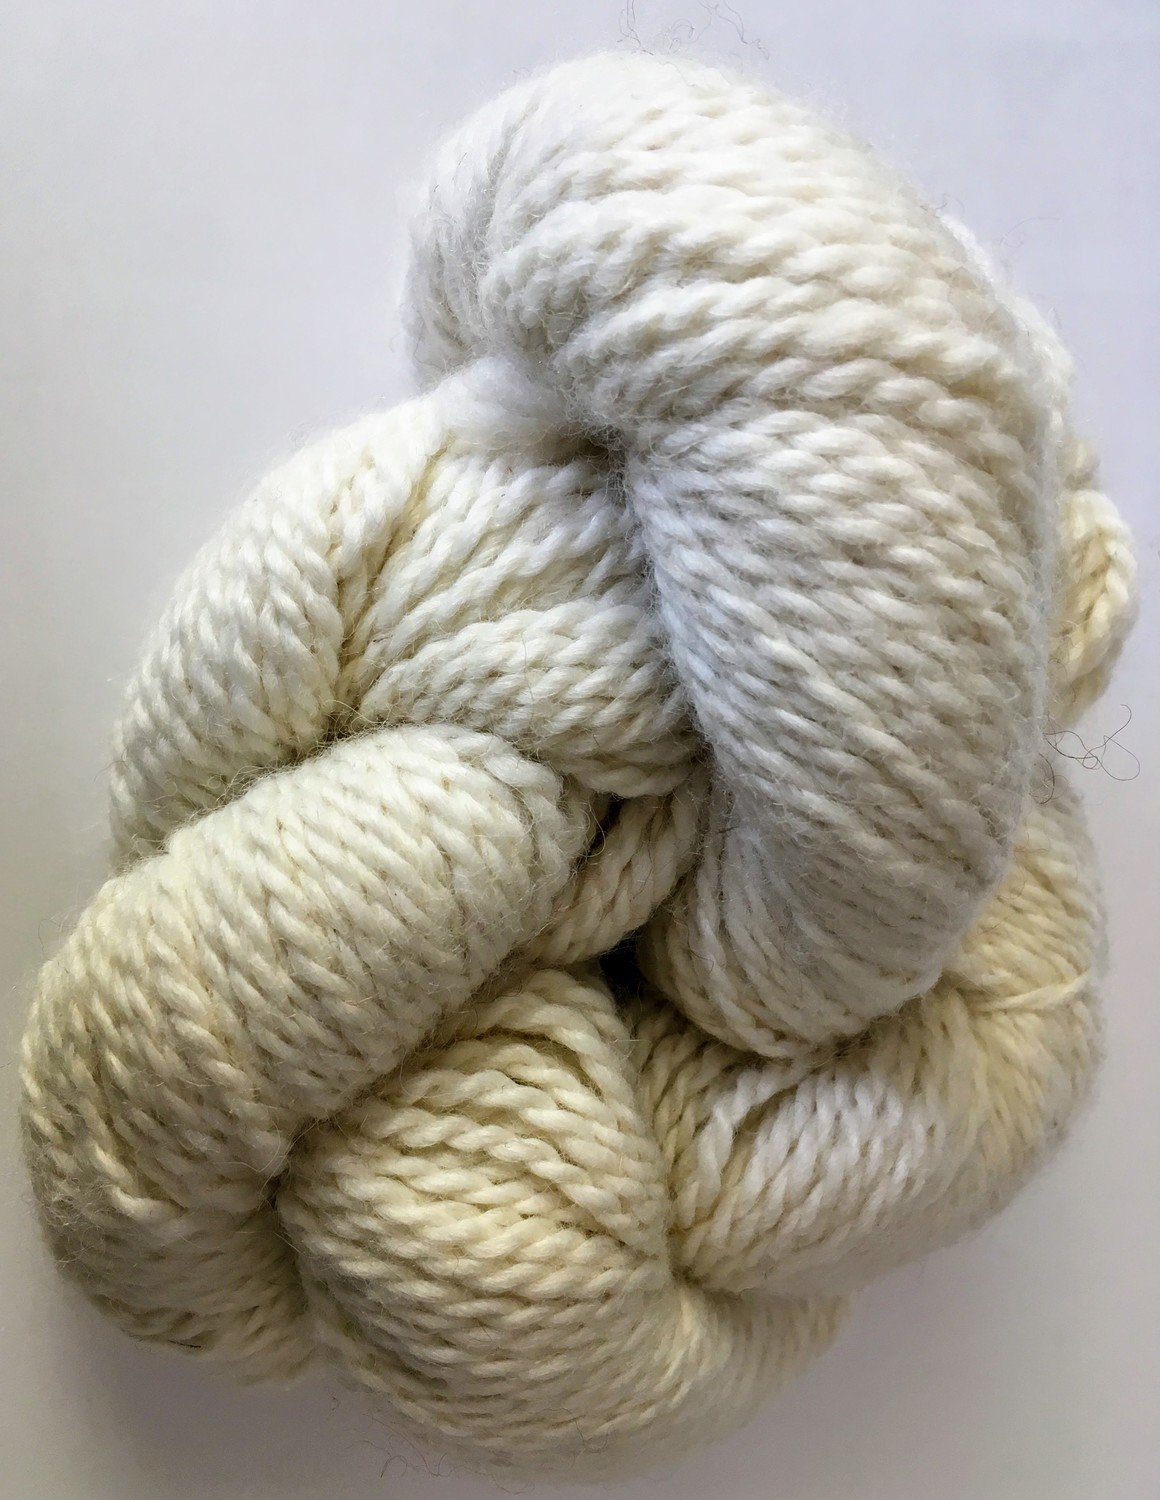 Breezy Hill Cottage-Milled, Hand-Dyed Yarn - Ivory